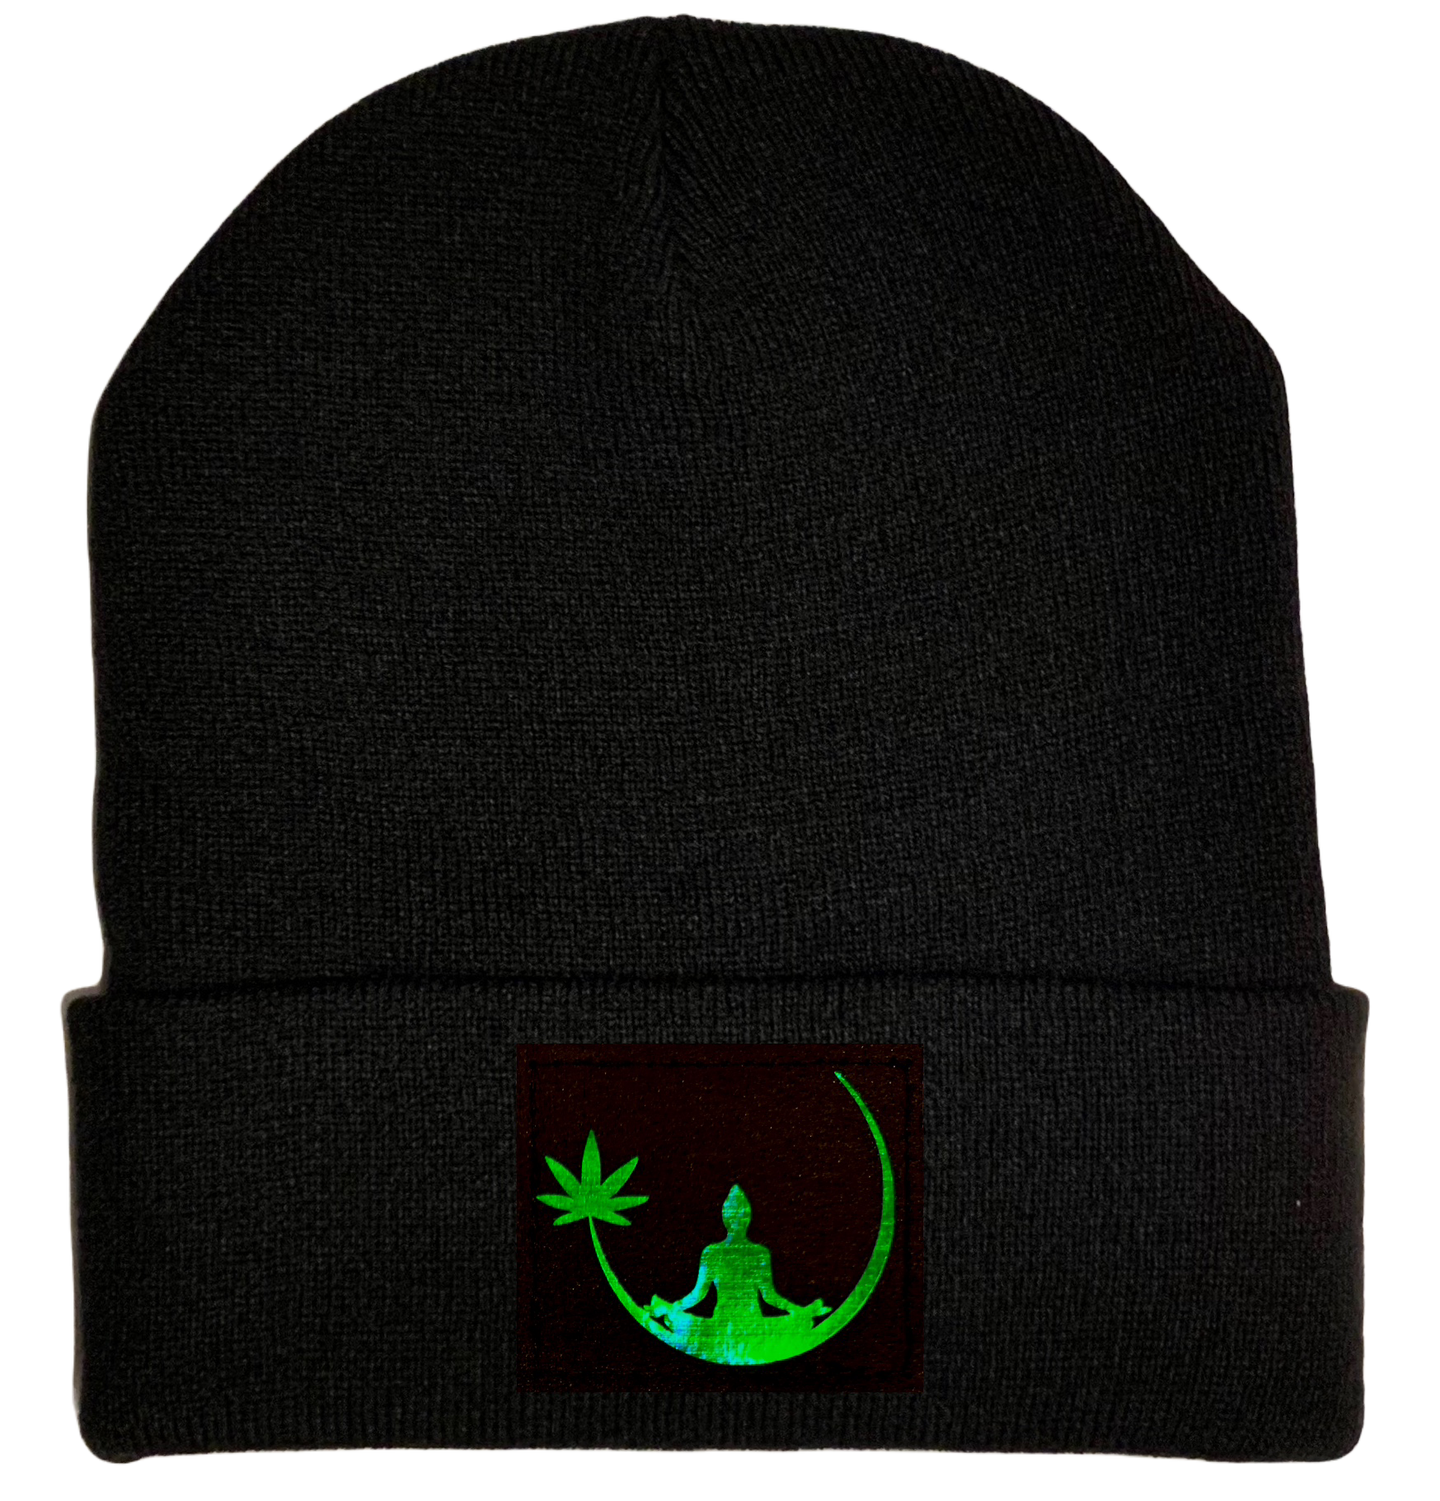 Black Beanie with Hand Made Holographic Green, Vegan Leather Zen Buddha Cannabis Leaf Patch over your Third Eye - Plant Medicine Hat buddha gear